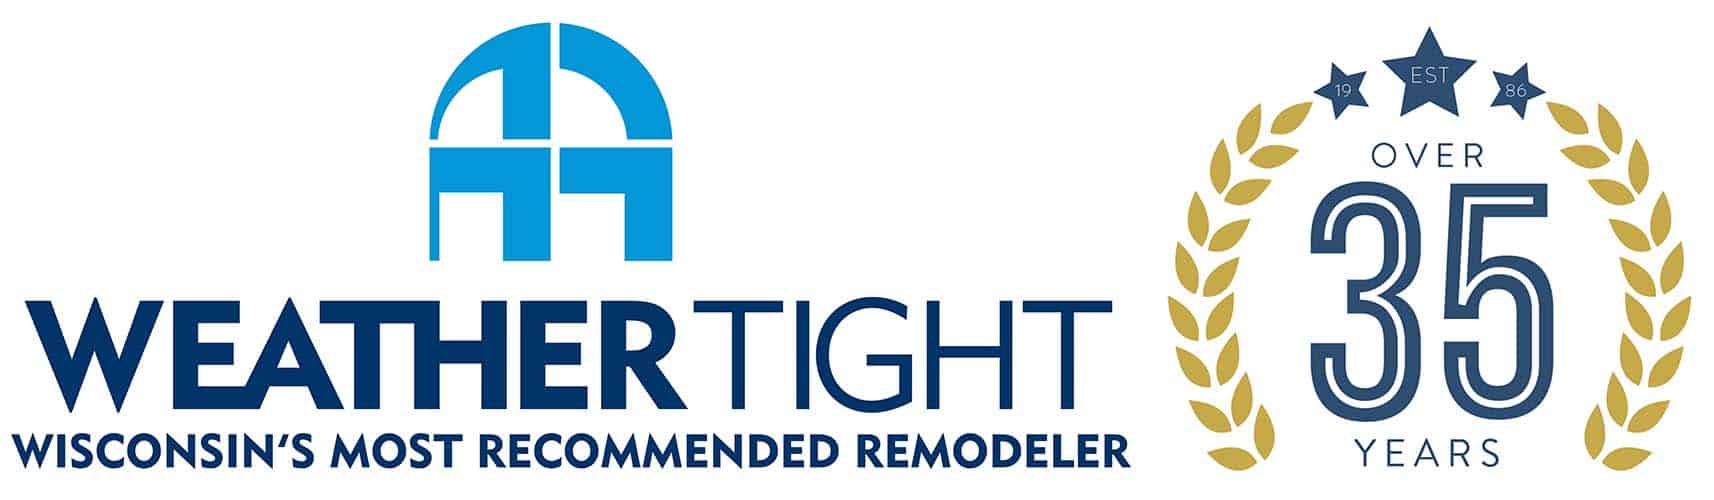 Weather Right is Wisconsin's Most Recommended Home Remodeler